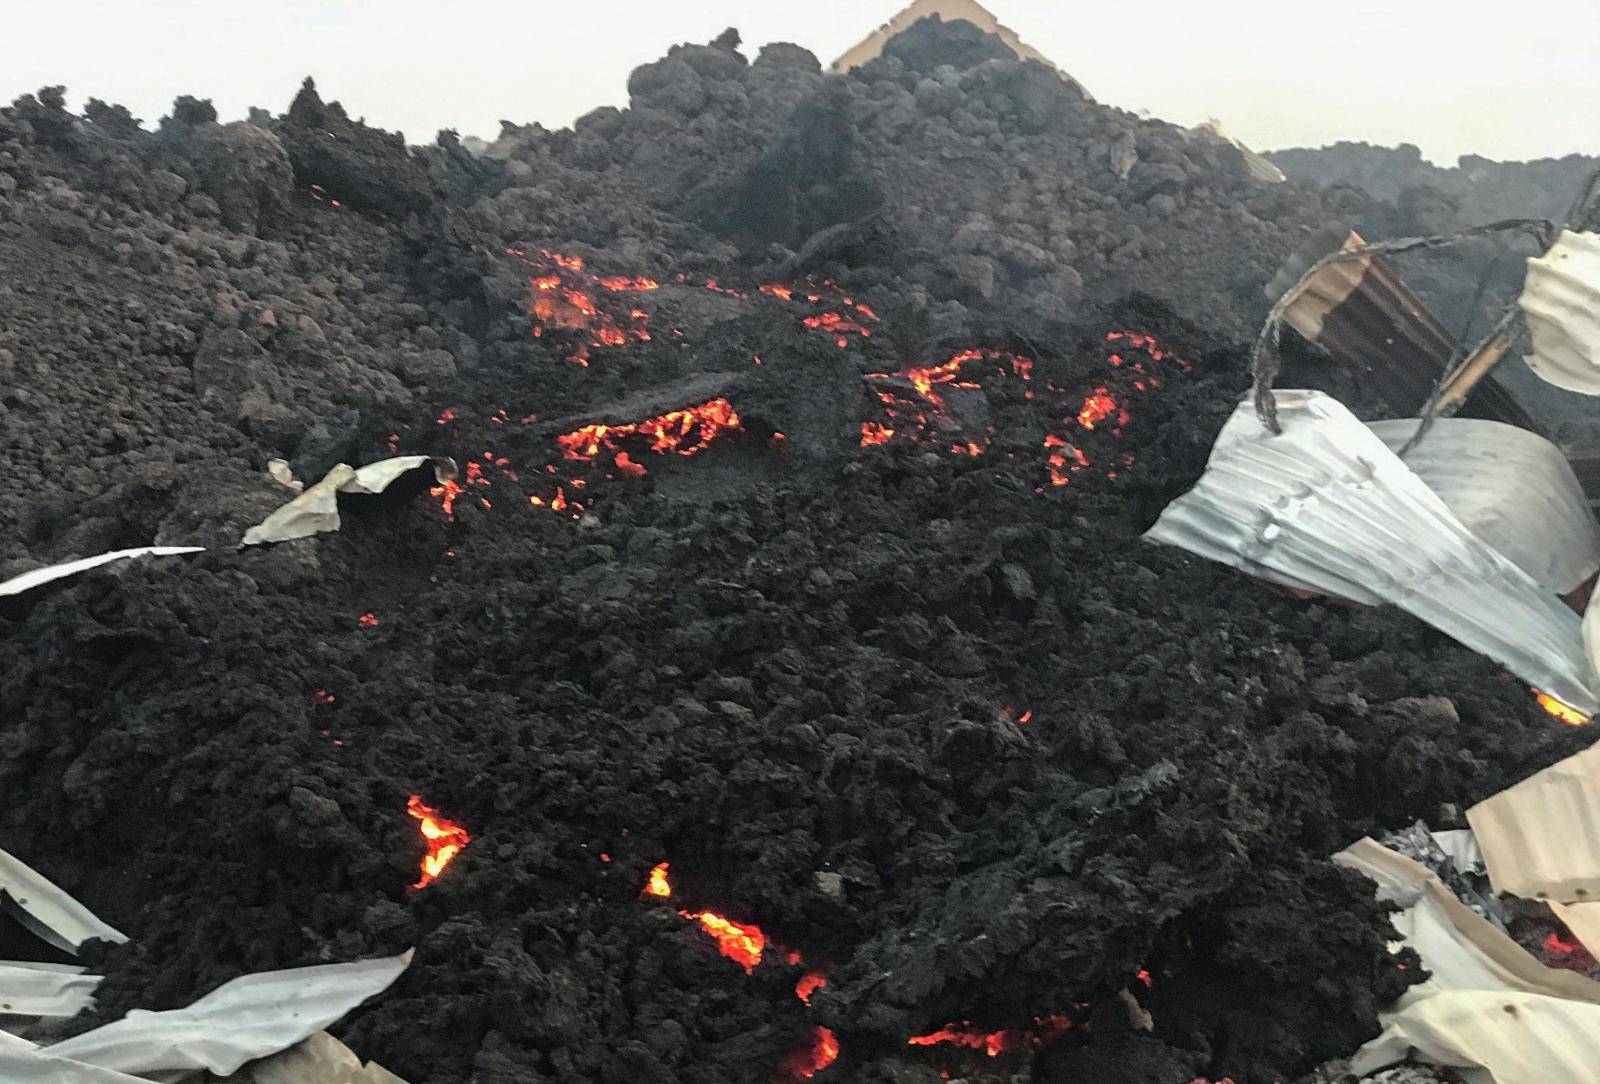 Smouldering lava deposited by the eruption of Mount Nyiragongo volcano is seen near Goma